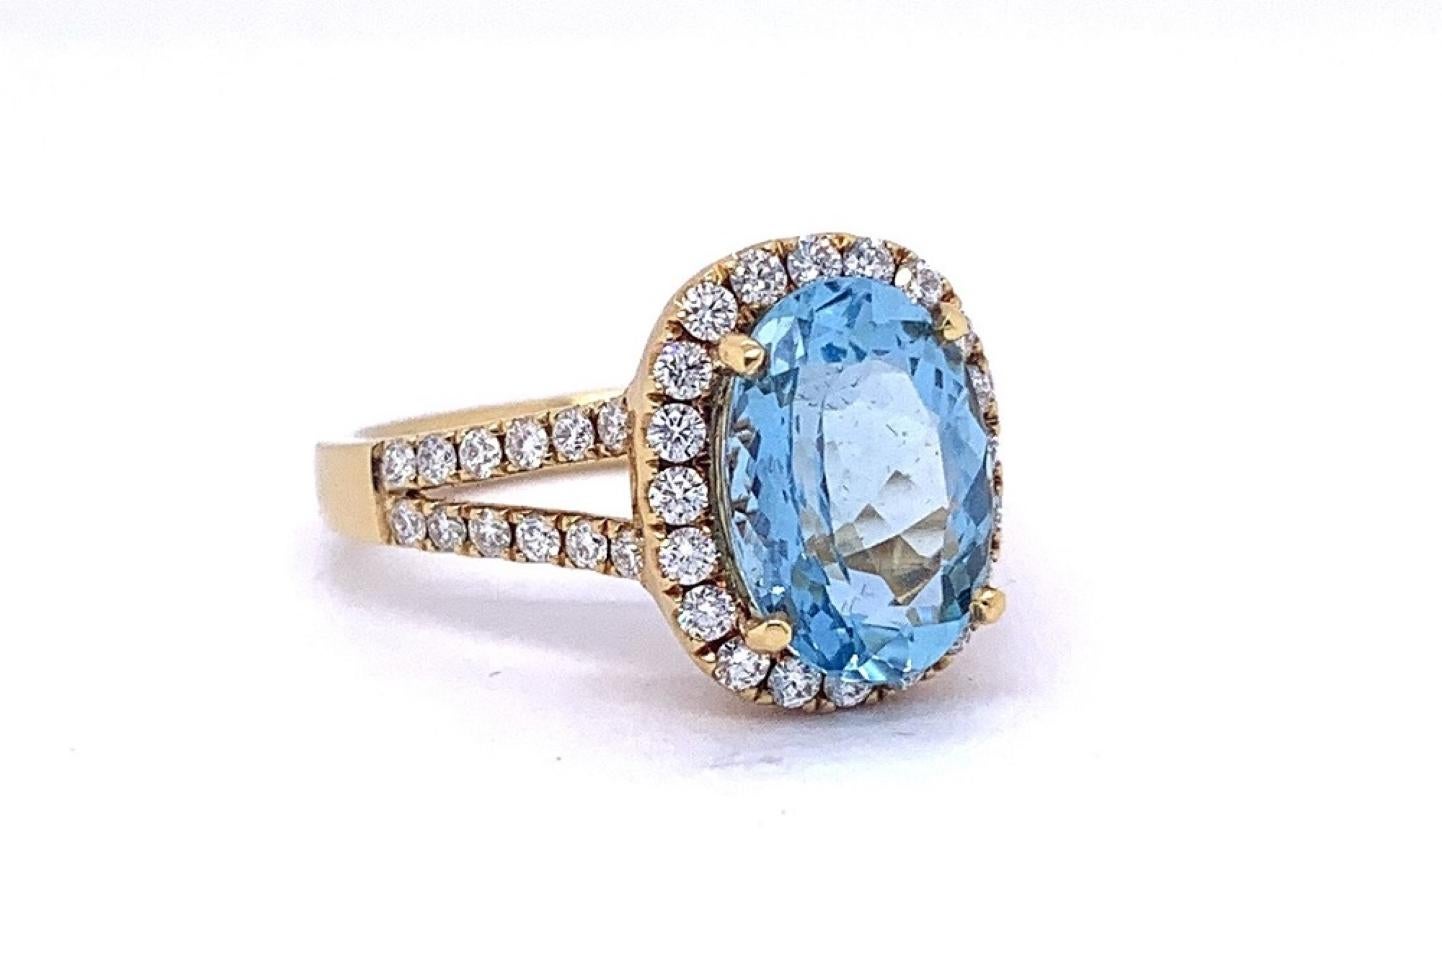 Oval Cut 2.54 Carat Aquamarine Ring with Diamond Accents set in 18 Karat Yellow Gold For Sale